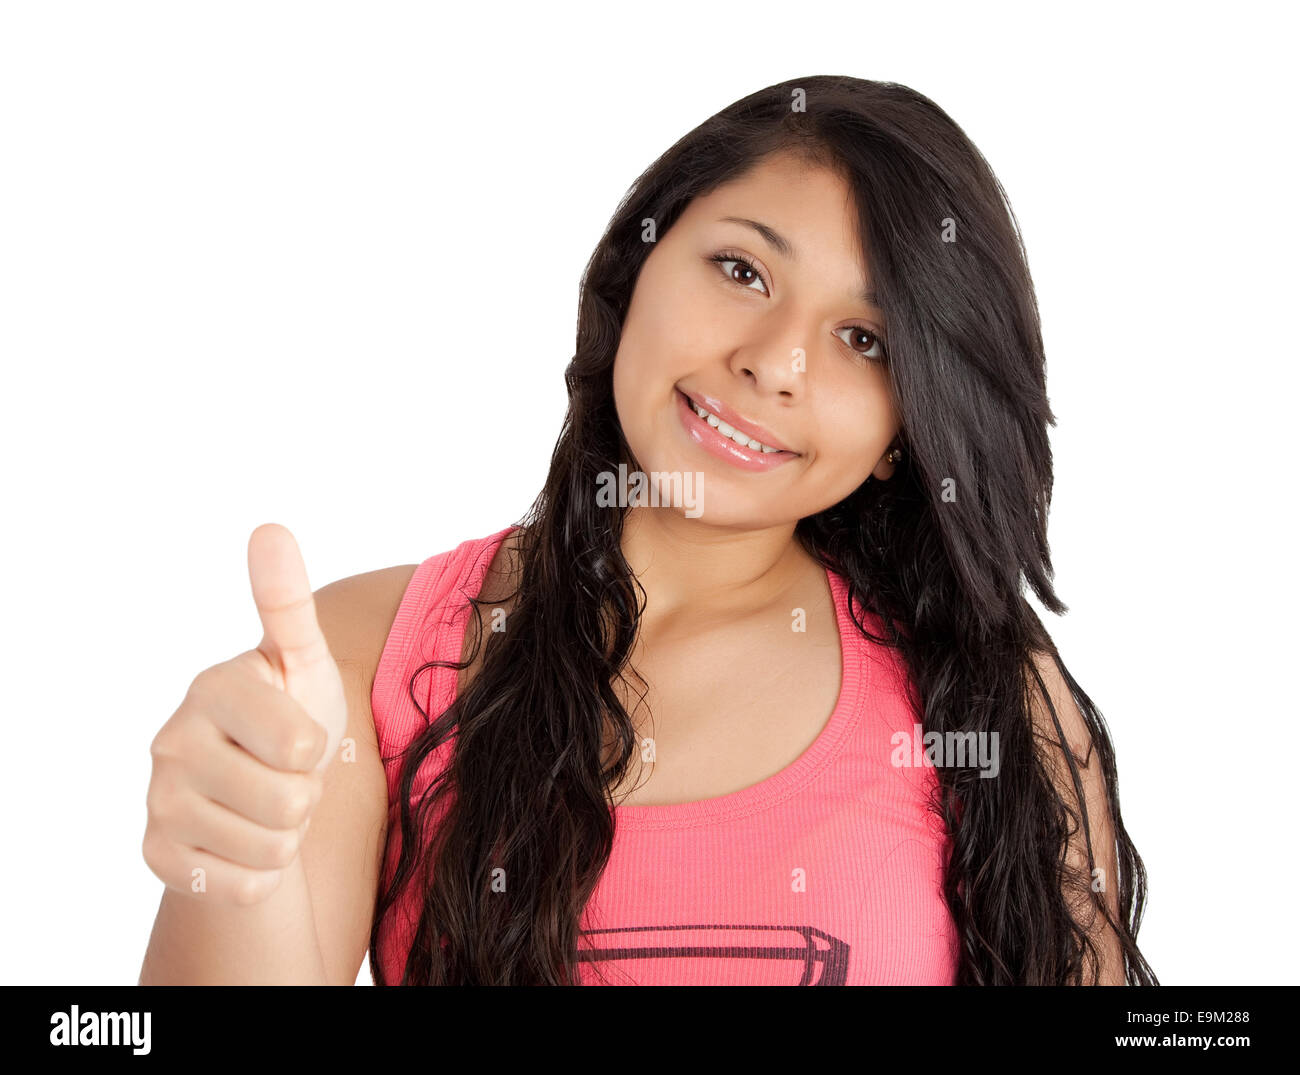 Happy teenager showing thumb up isolated on white Banque D'Images